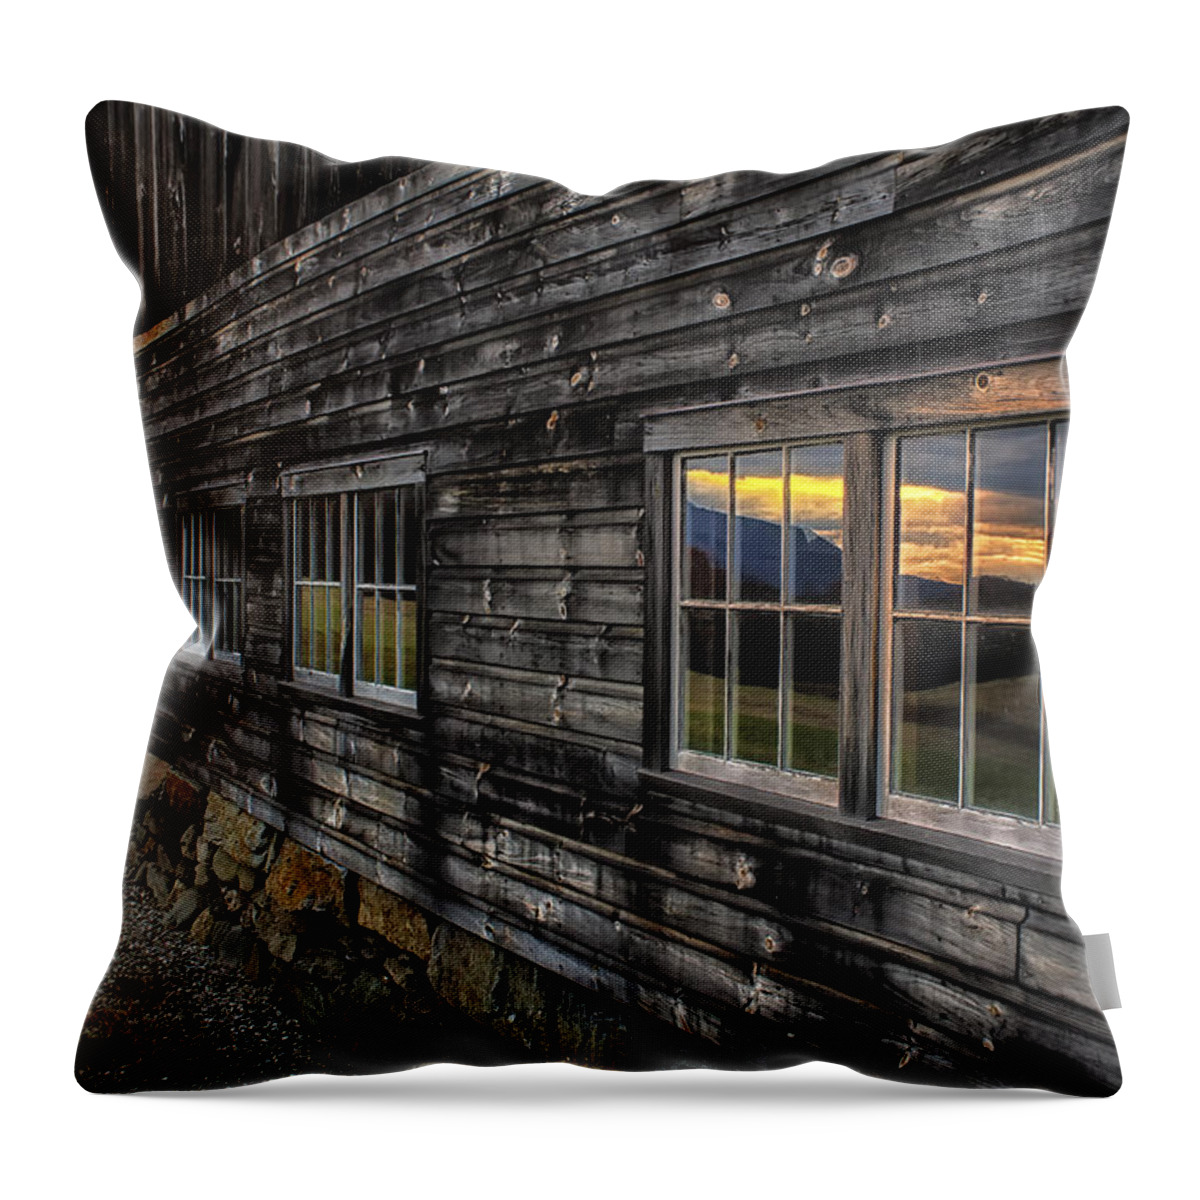 Nh Scenics Throw Pillow featuring the photograph Sunset Reflections by John Vose